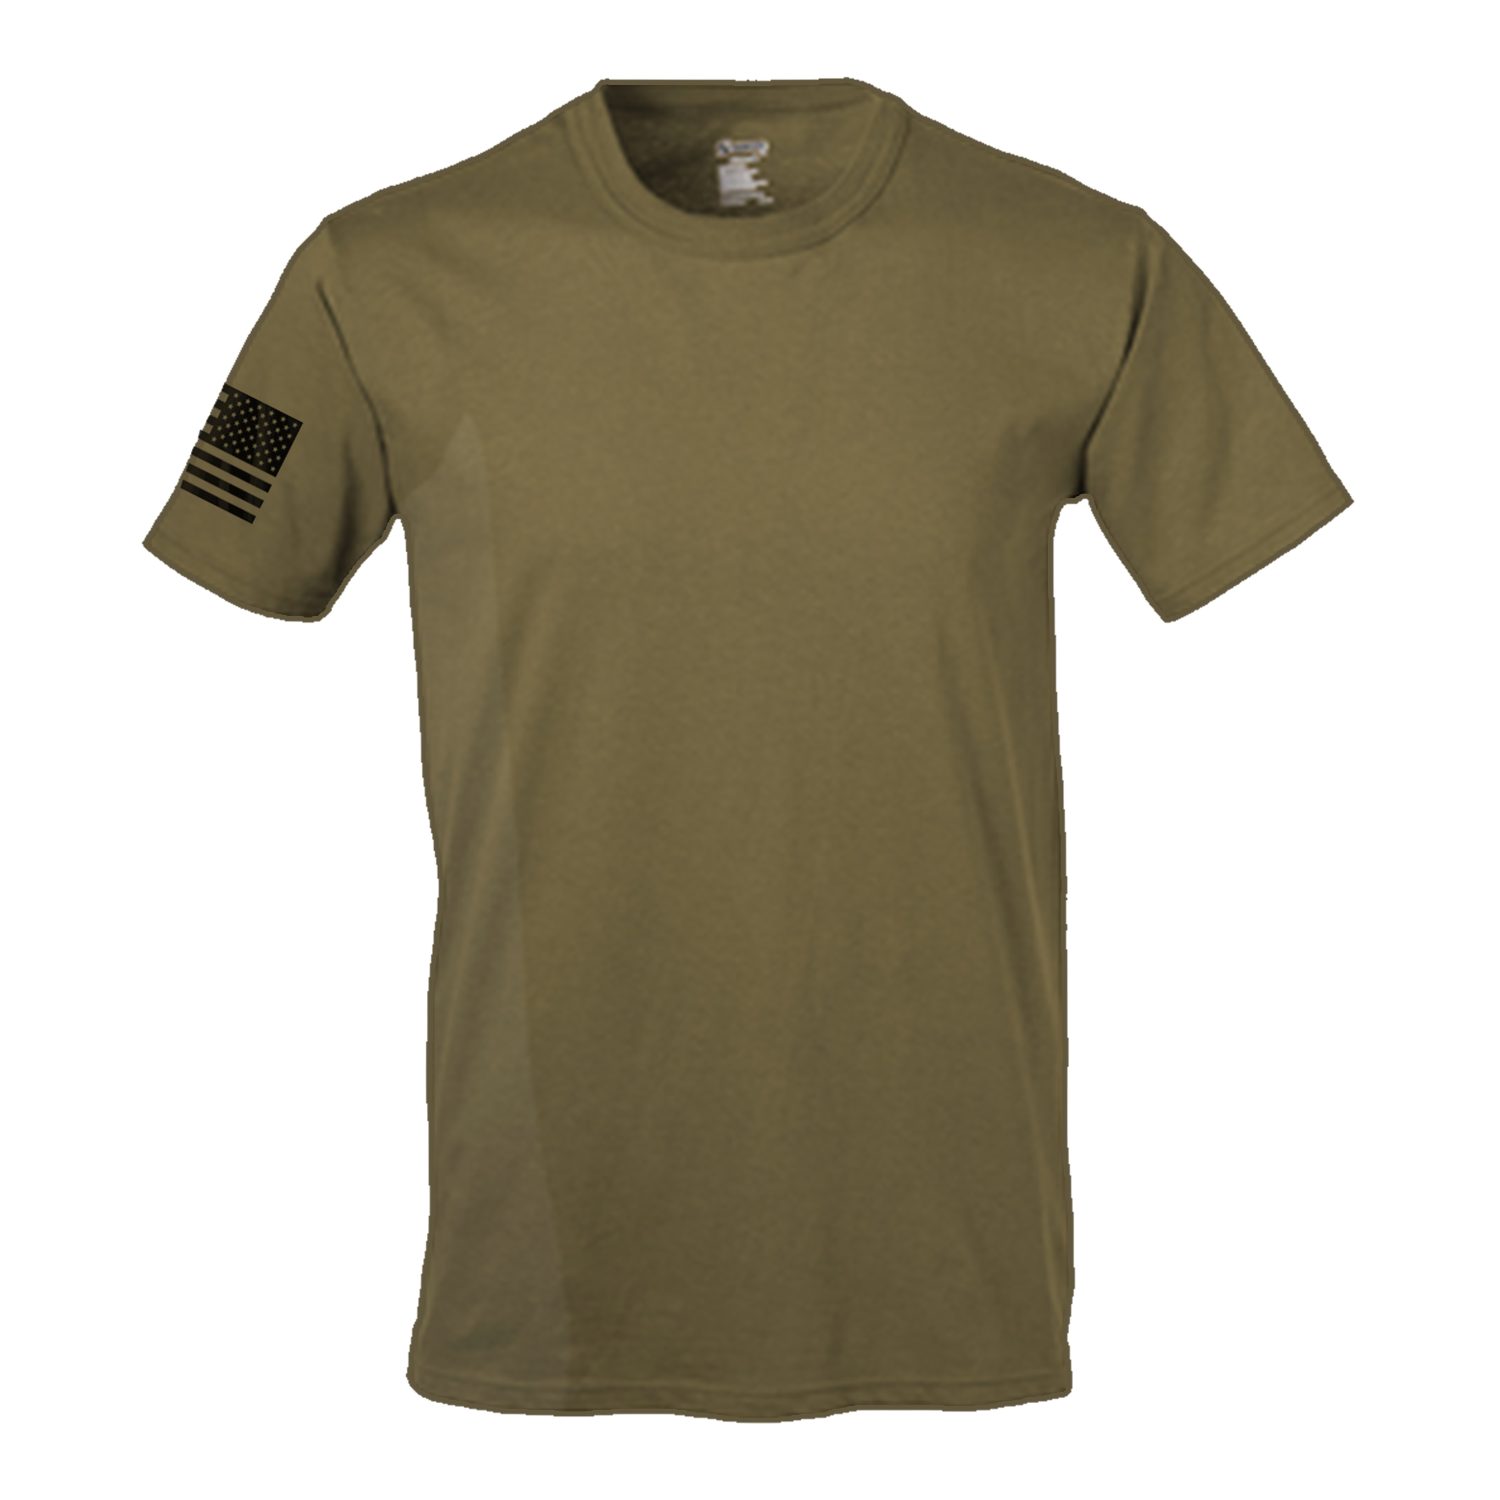 E Co, 5-101 Renegades Flight Approved T-Shirt | Military Unit Shirts ...